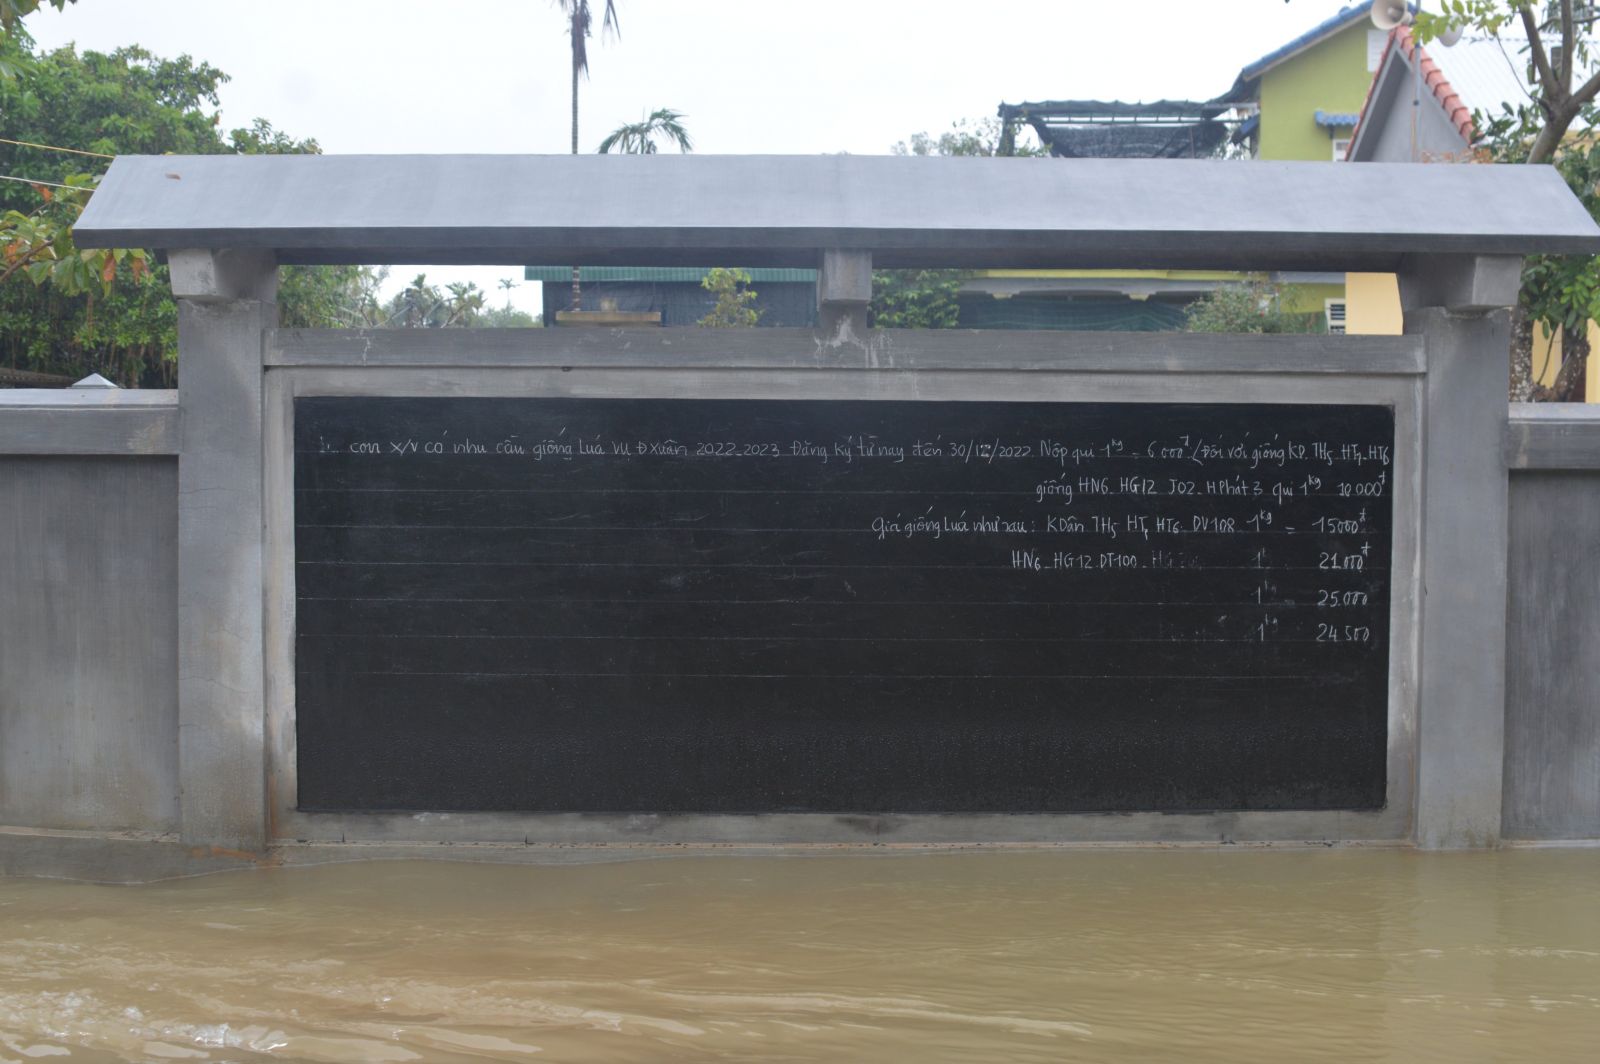 Floodwater rising to the edge of the notice board of Xuan Tuy Village